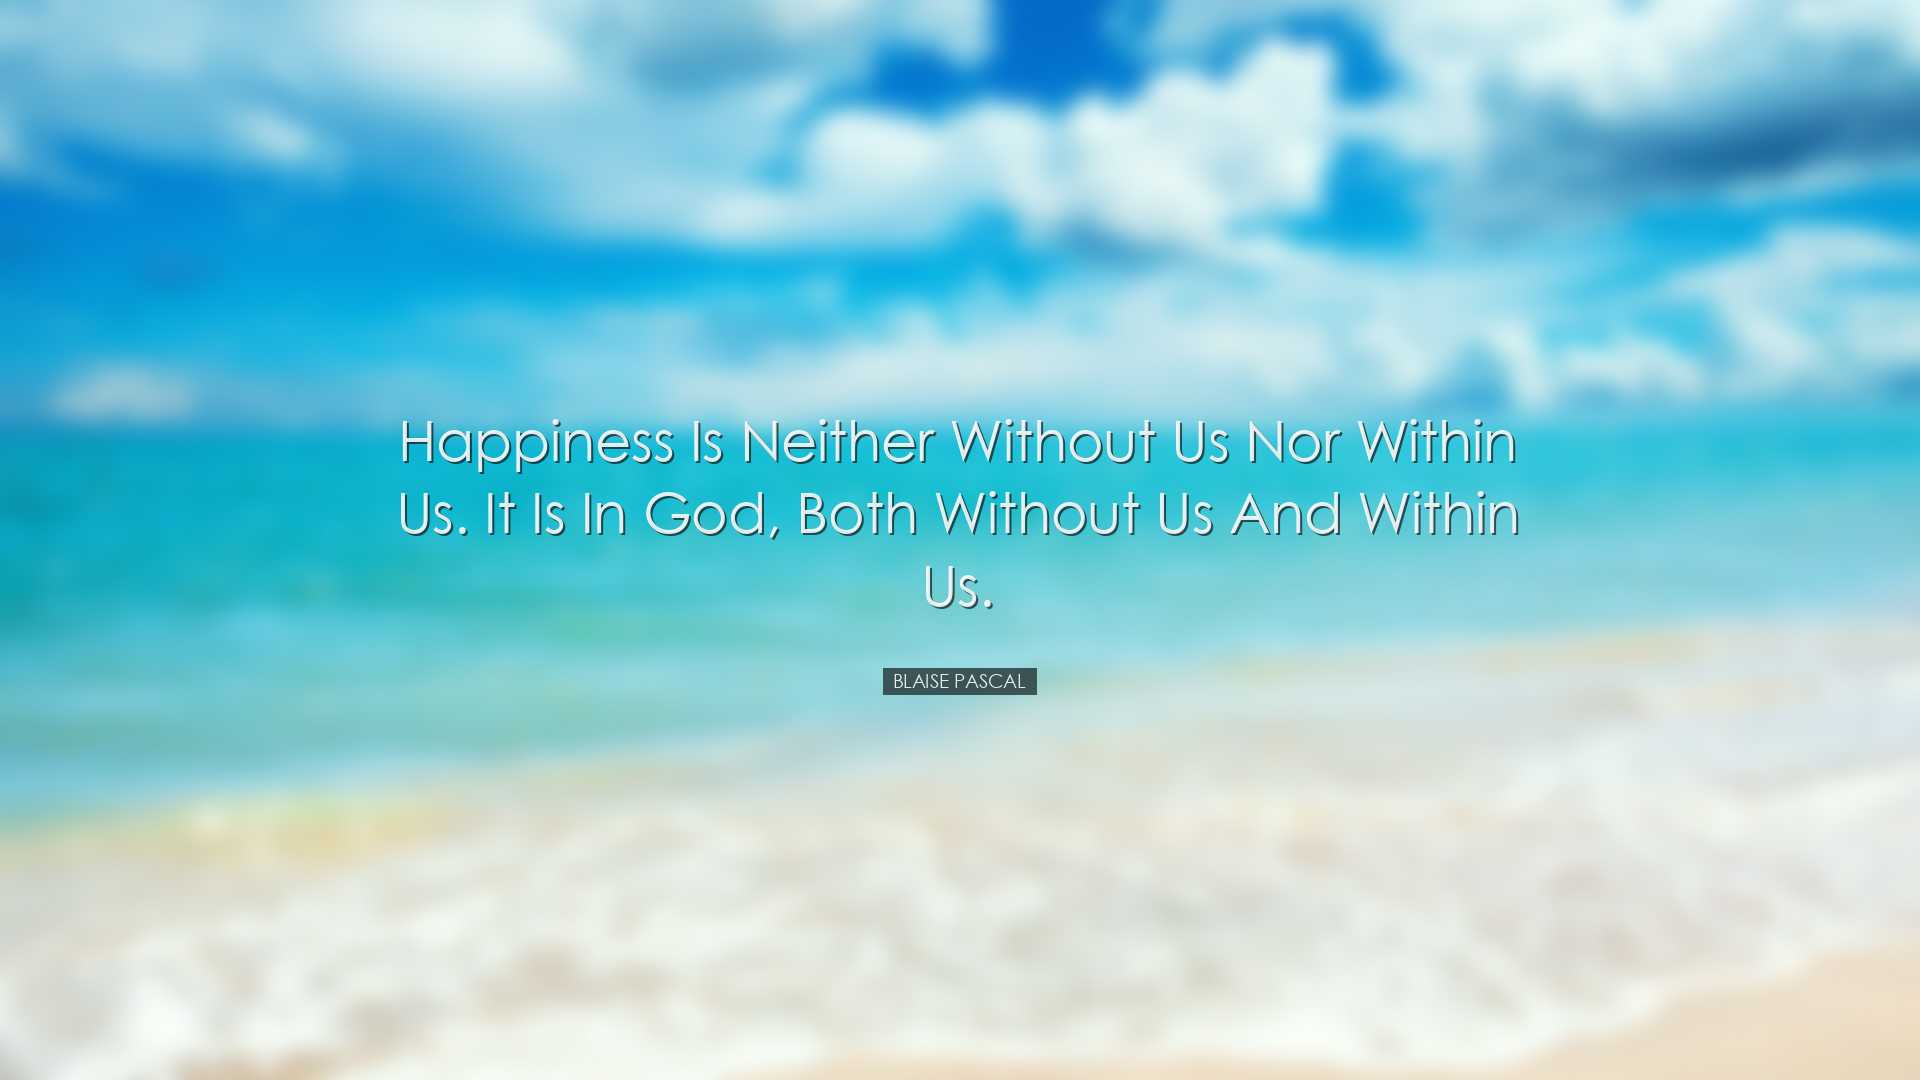 Happiness is neither without us nor within us. It is in God, both